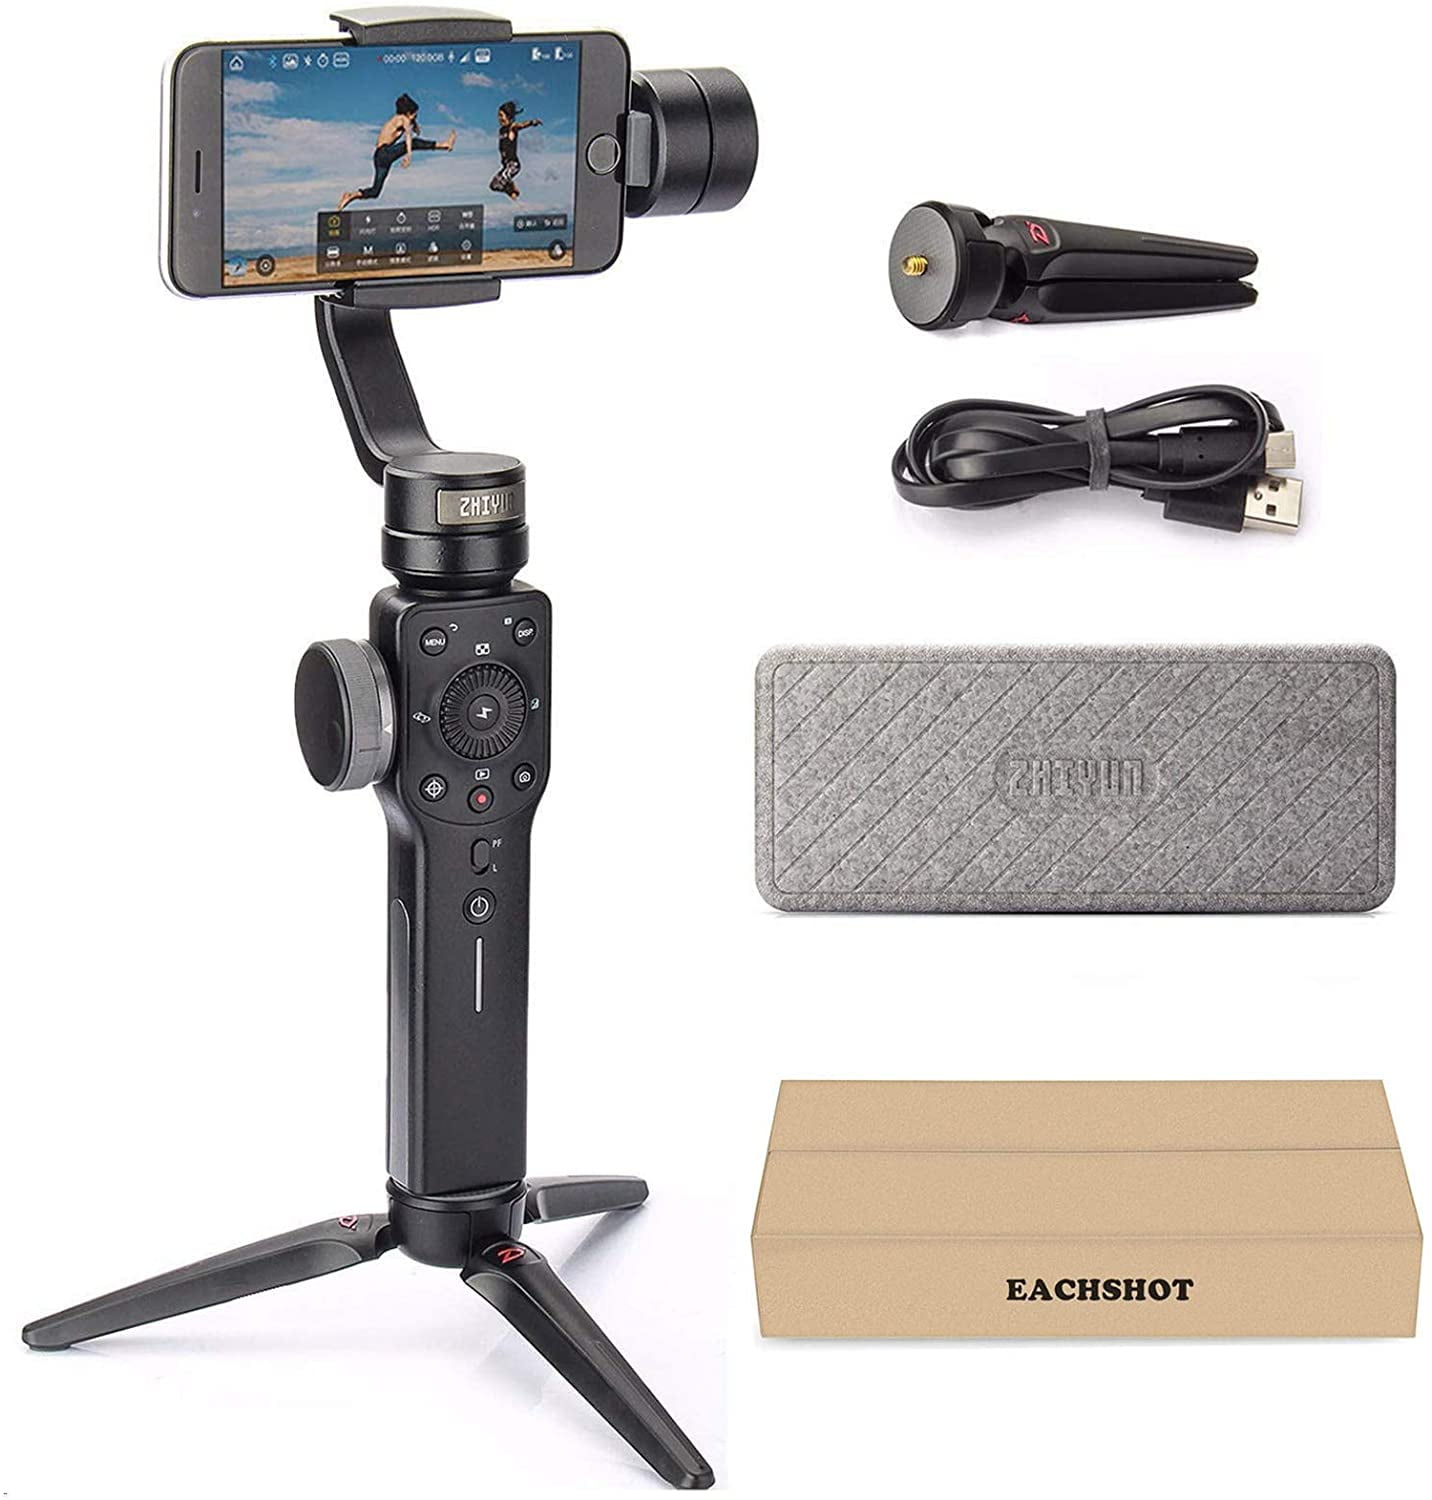 3-Axis Handheld Smartphone Gimbal with Tripod for iPhone Android Ideal for Vlogging YouTube Vlog TikTok Instagram Live Video Zhiyun Smooth 5 Gimbal Stabilizer 